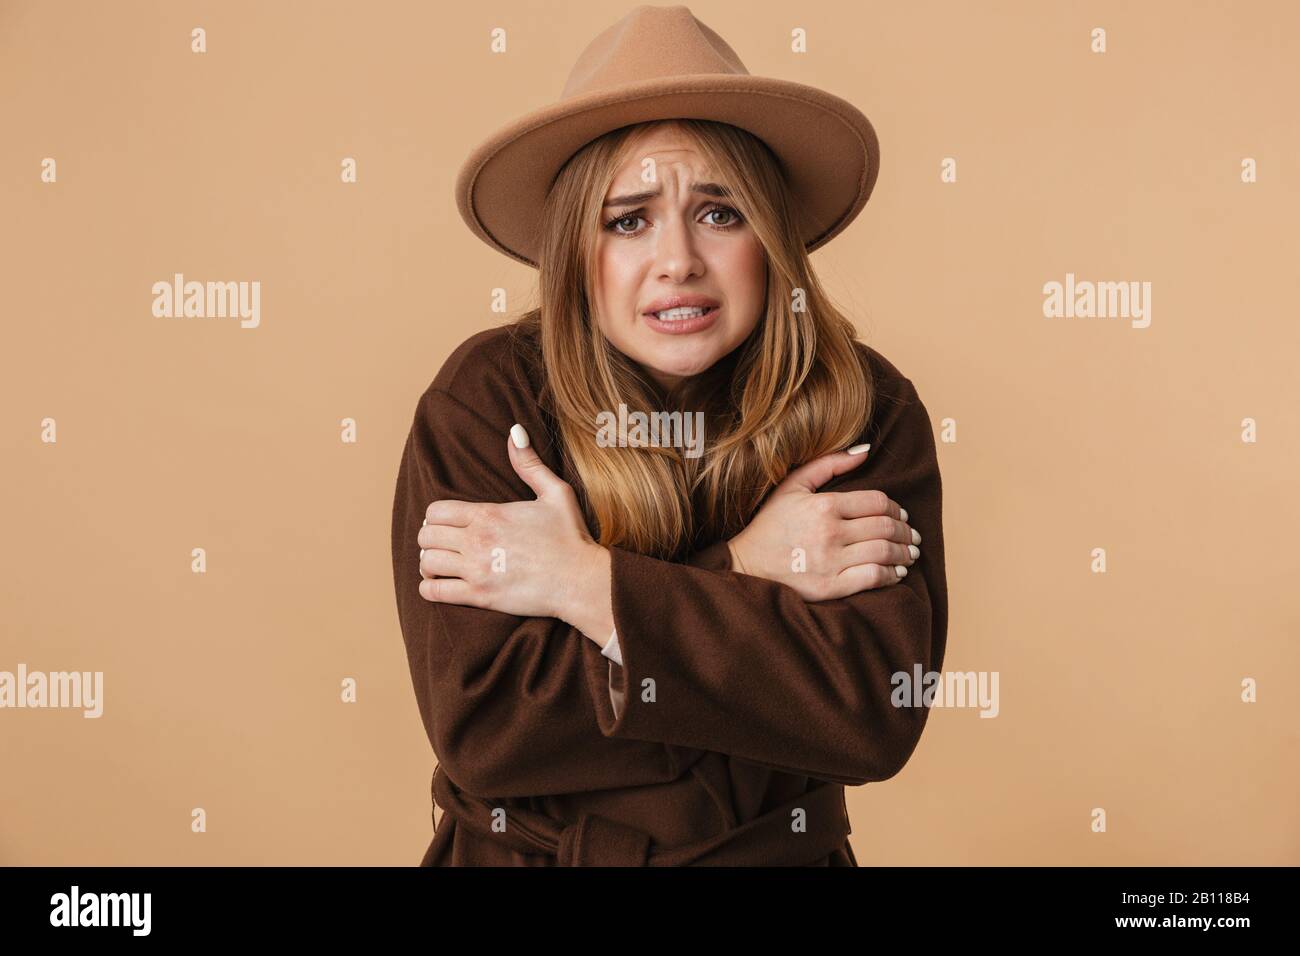 Image of young caucasian girl wearing hat and coat trembling and feeling cold isolated over beige background Stock Photo